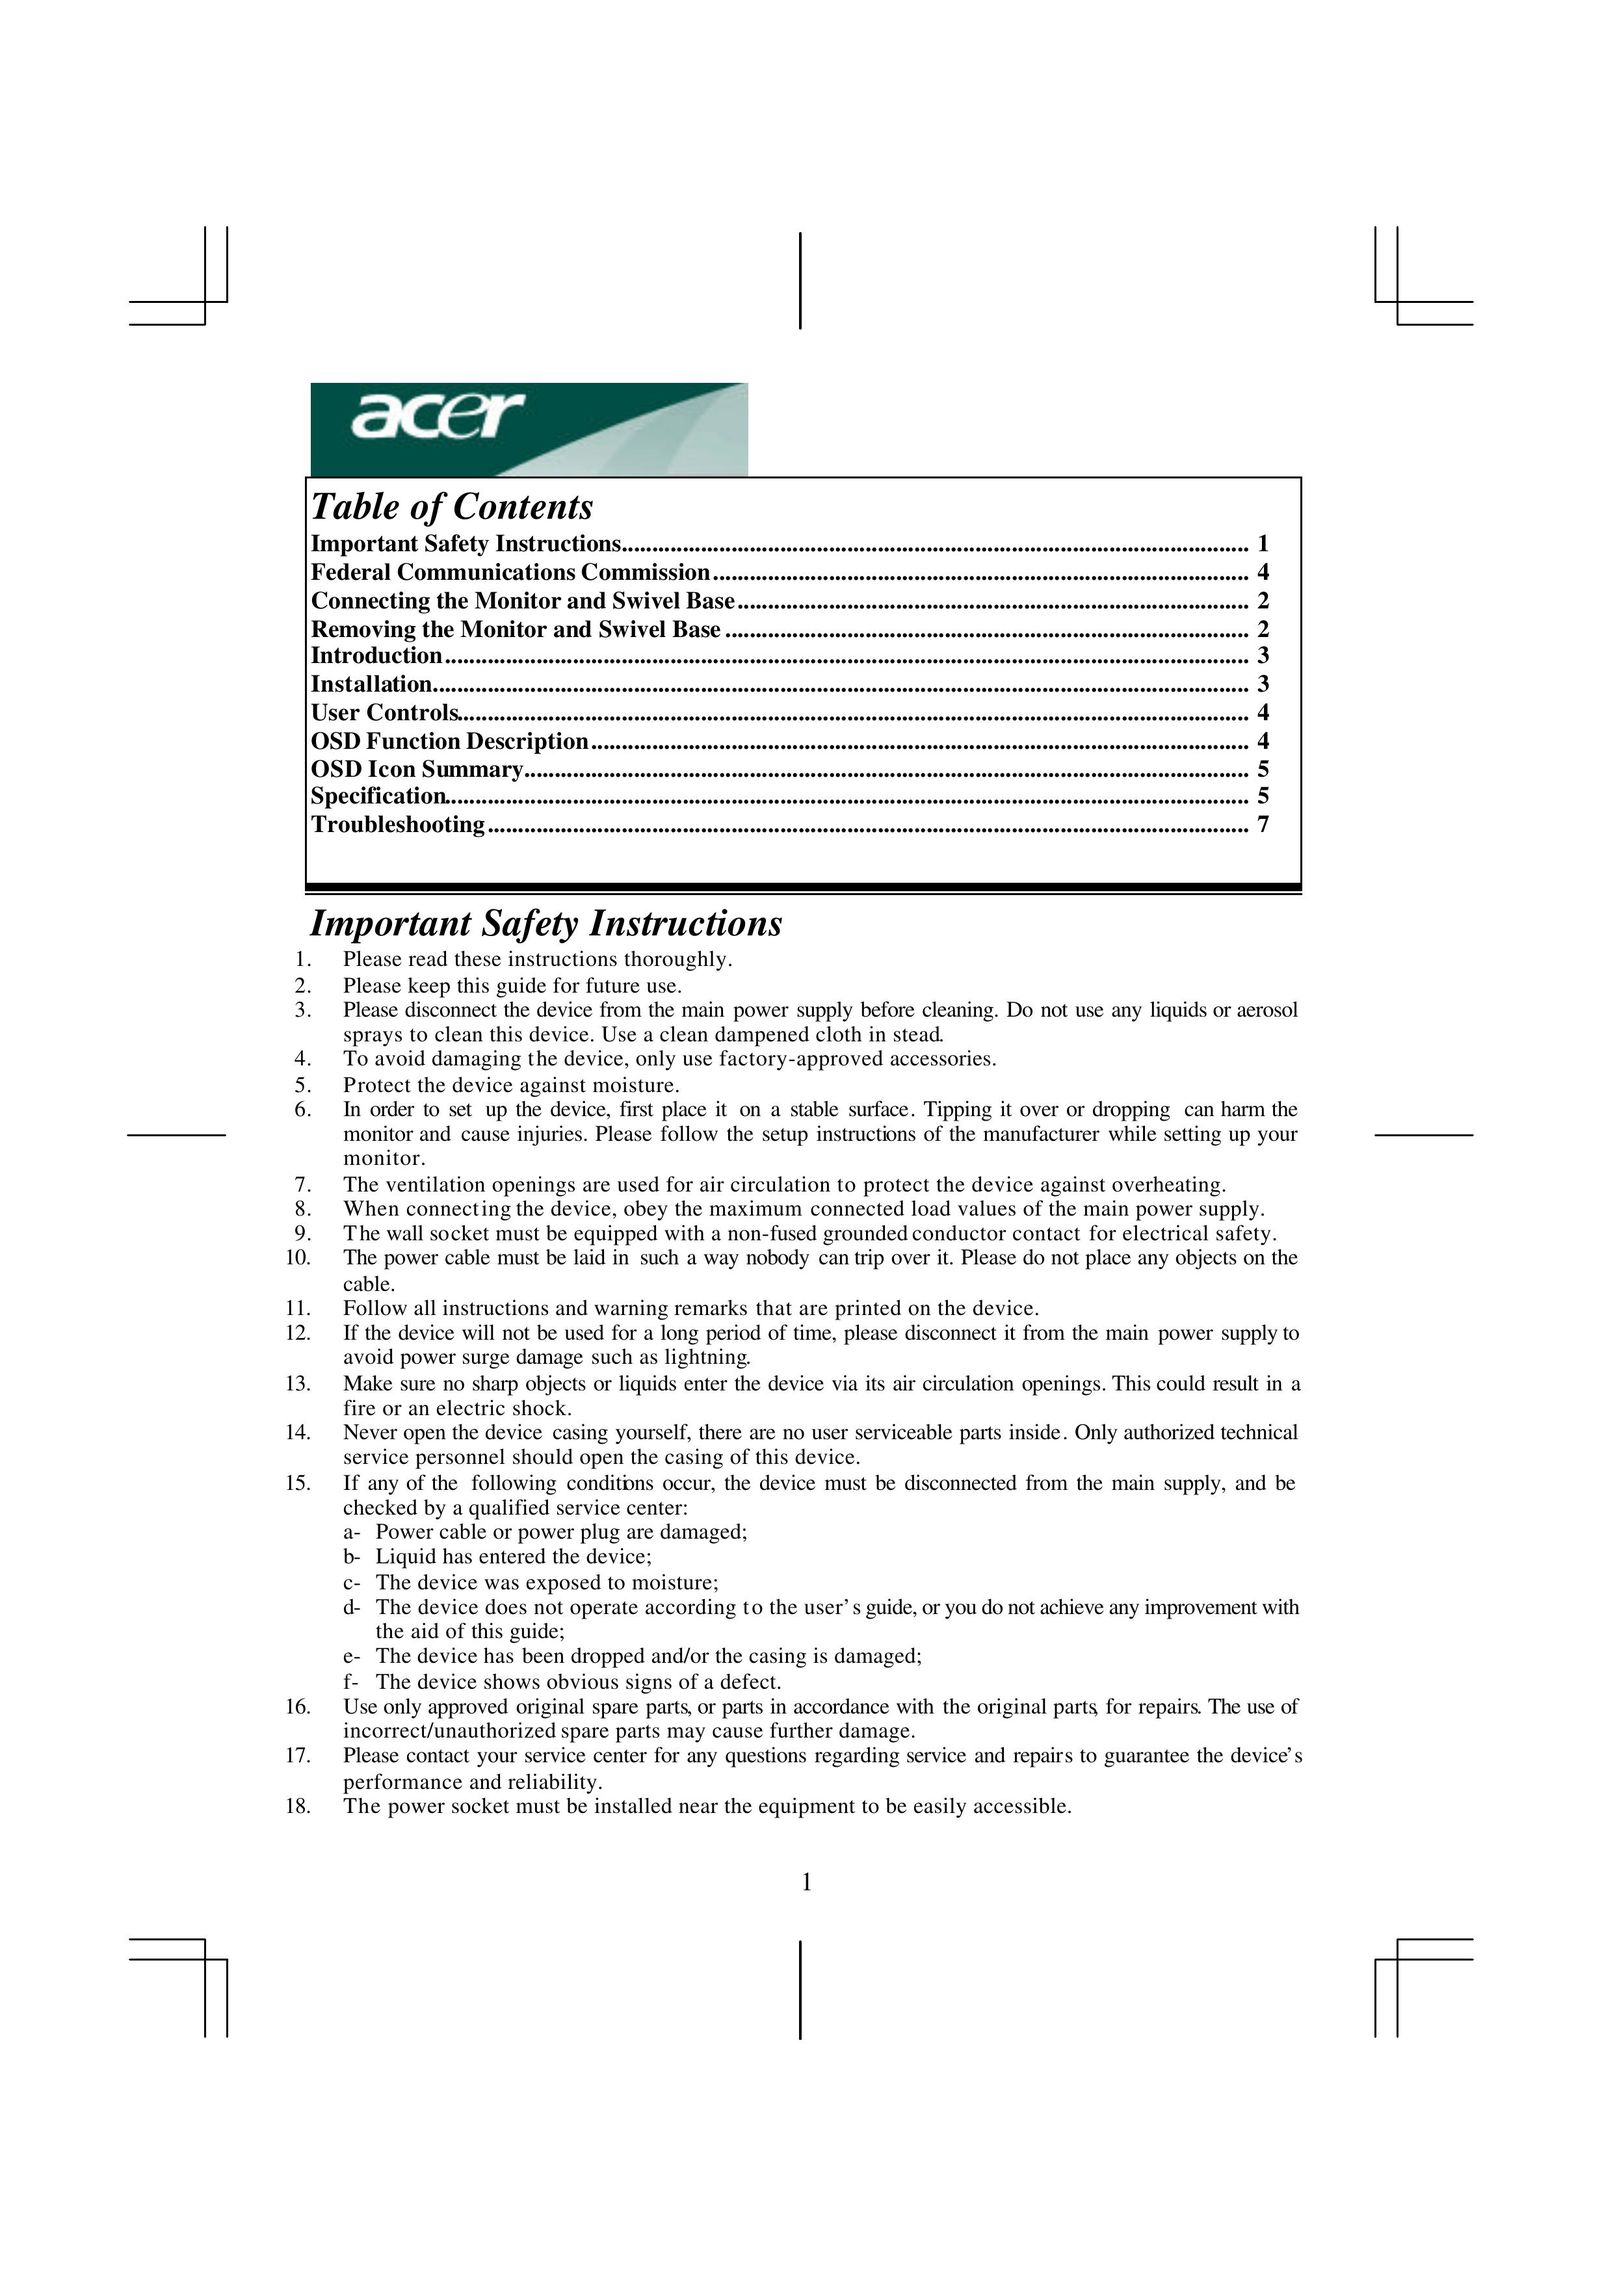 Acer AC 711 Computer Monitor User Manual